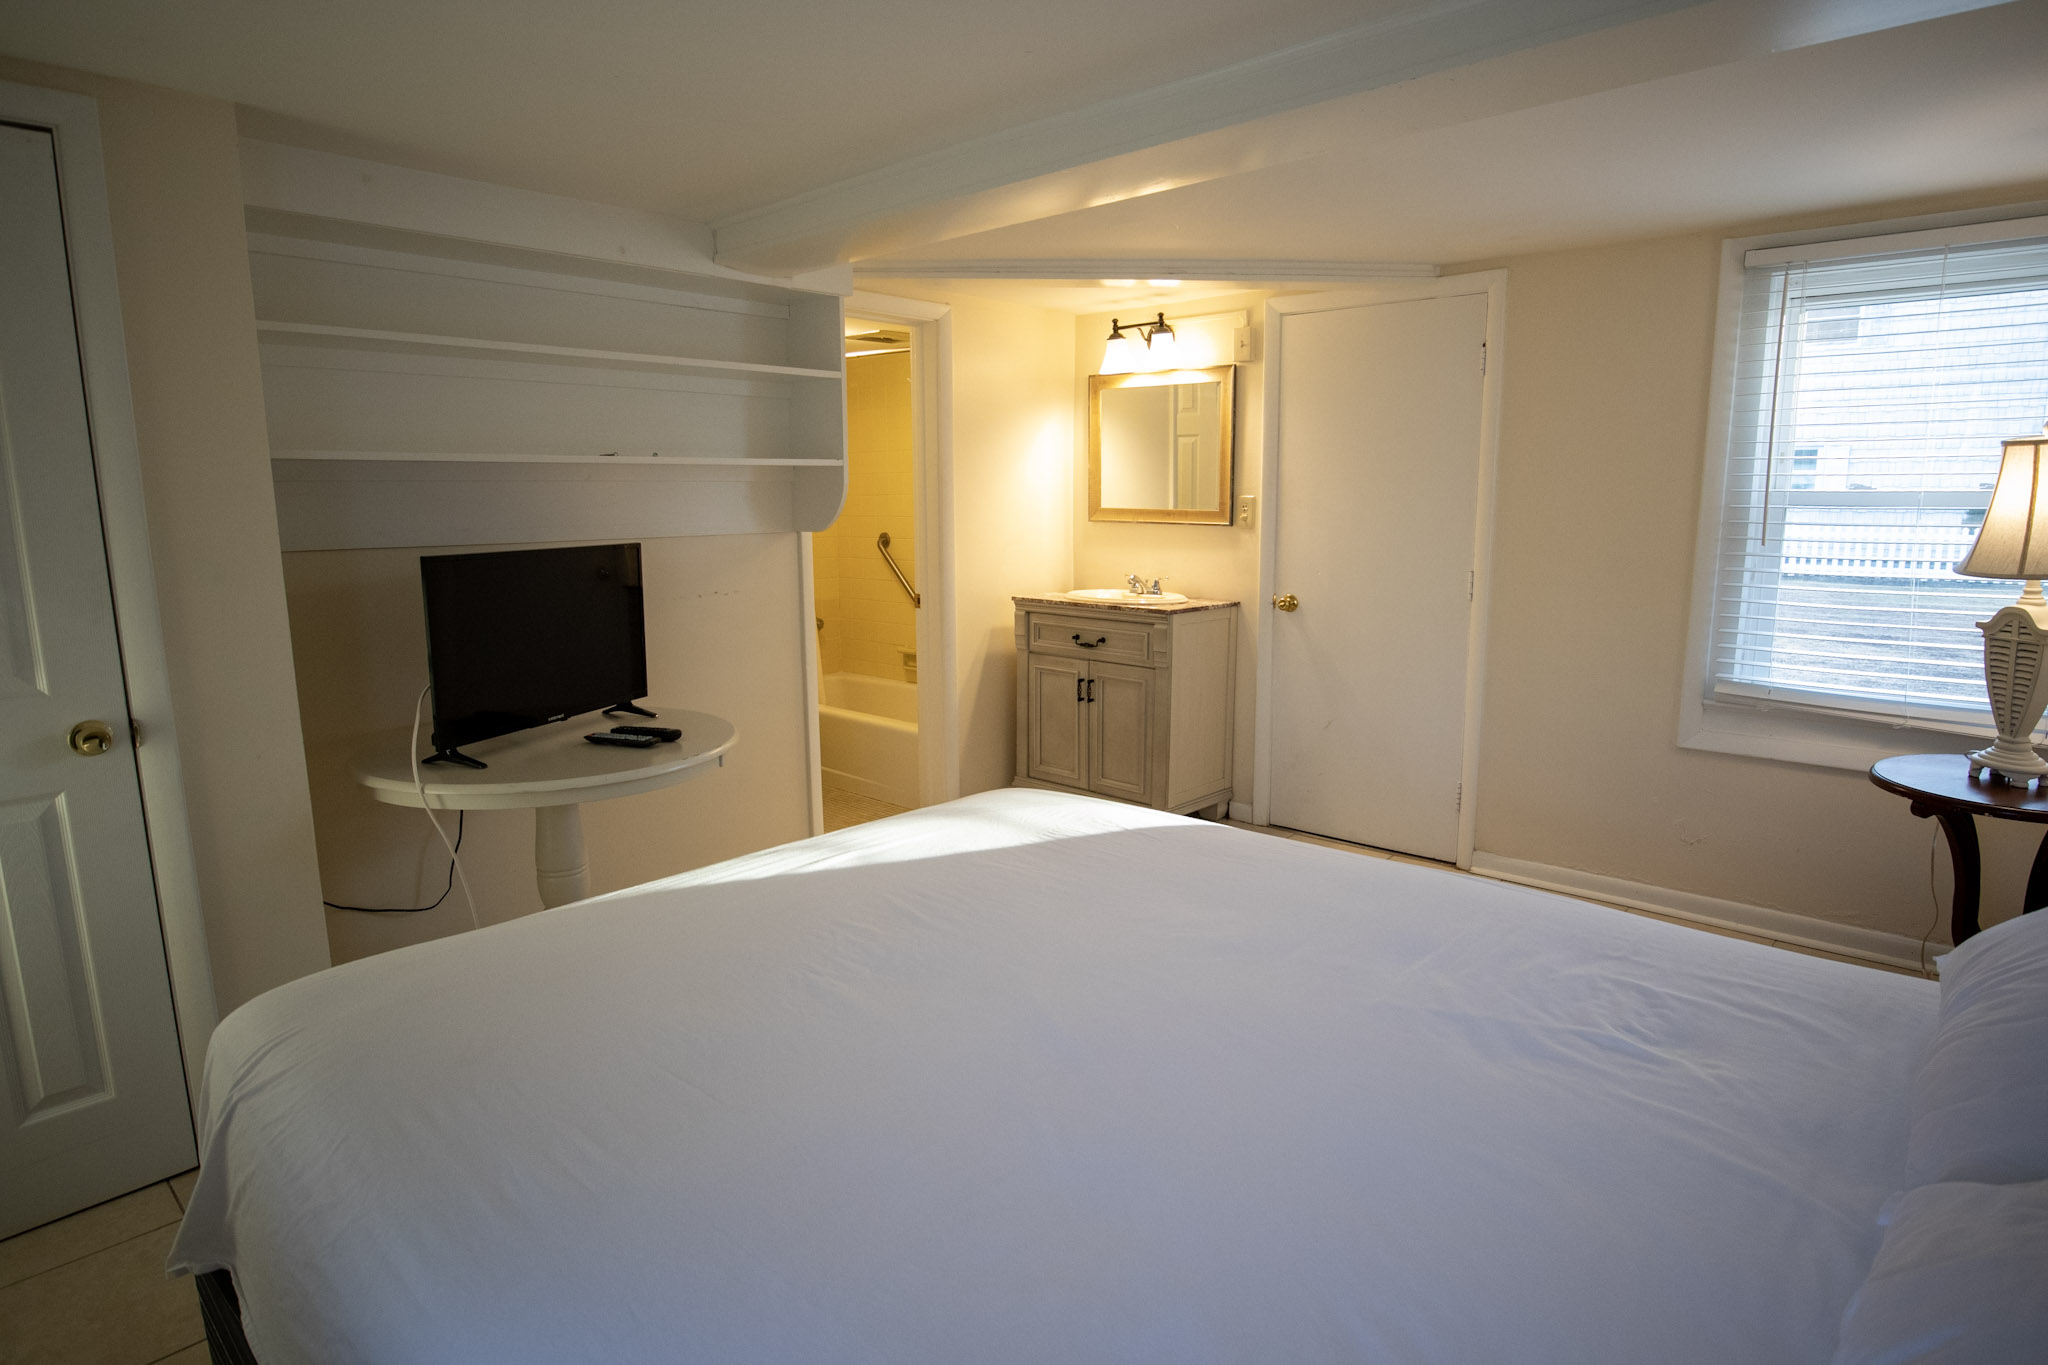 Studio apartment with queen size bed at the Majestic Hotel in Ocean City, Maryland